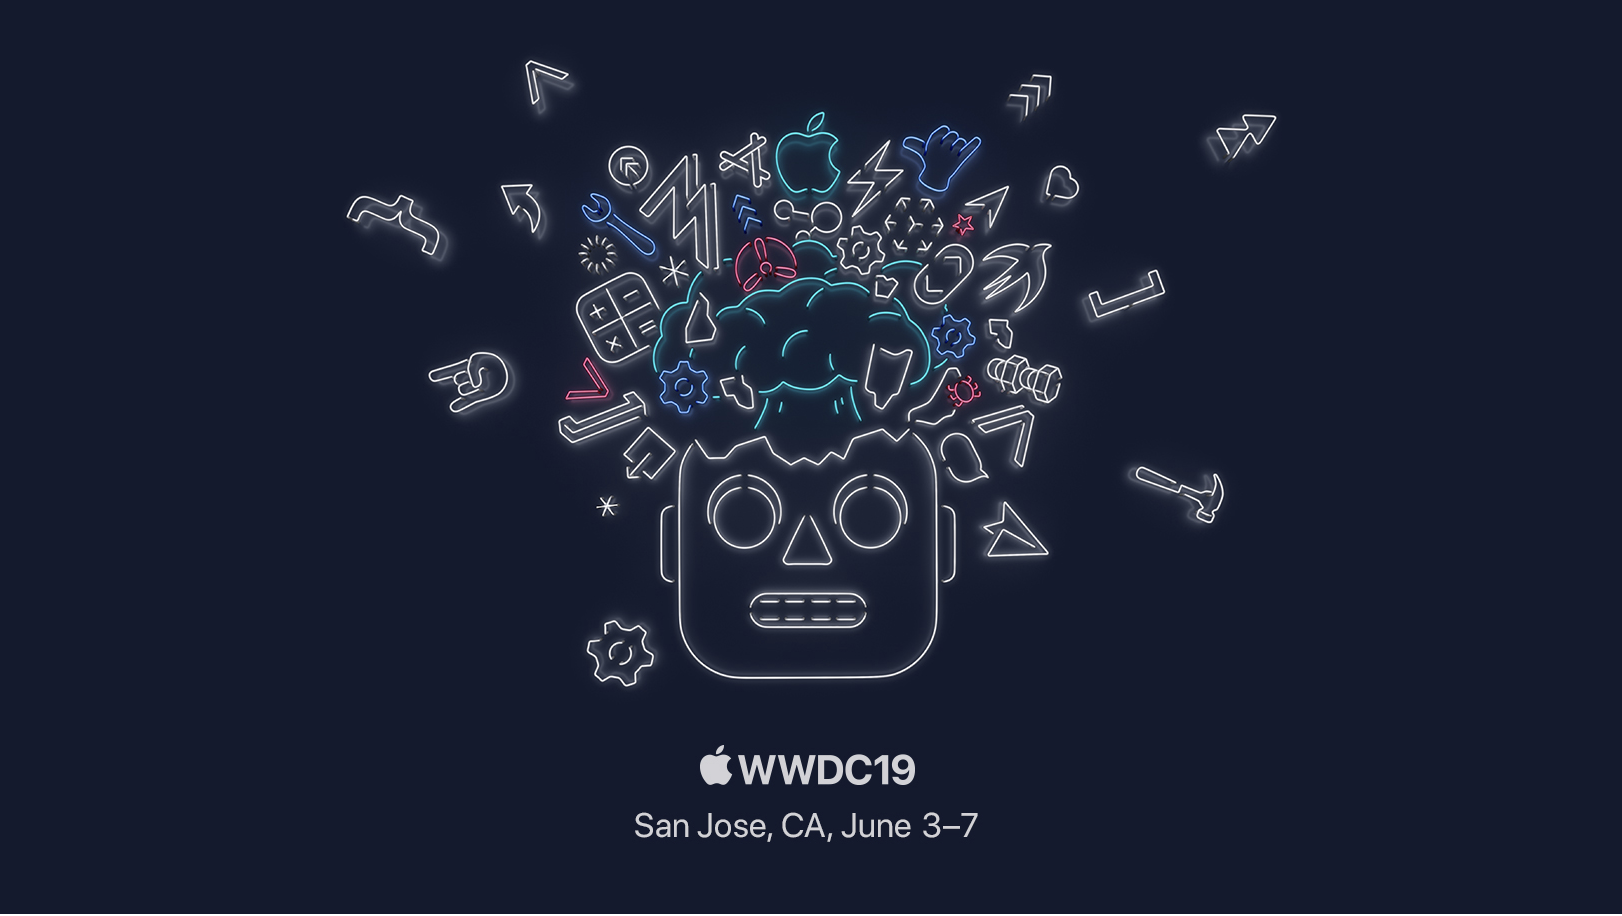 Apple has opened up WWDC 2019 scholarships for students